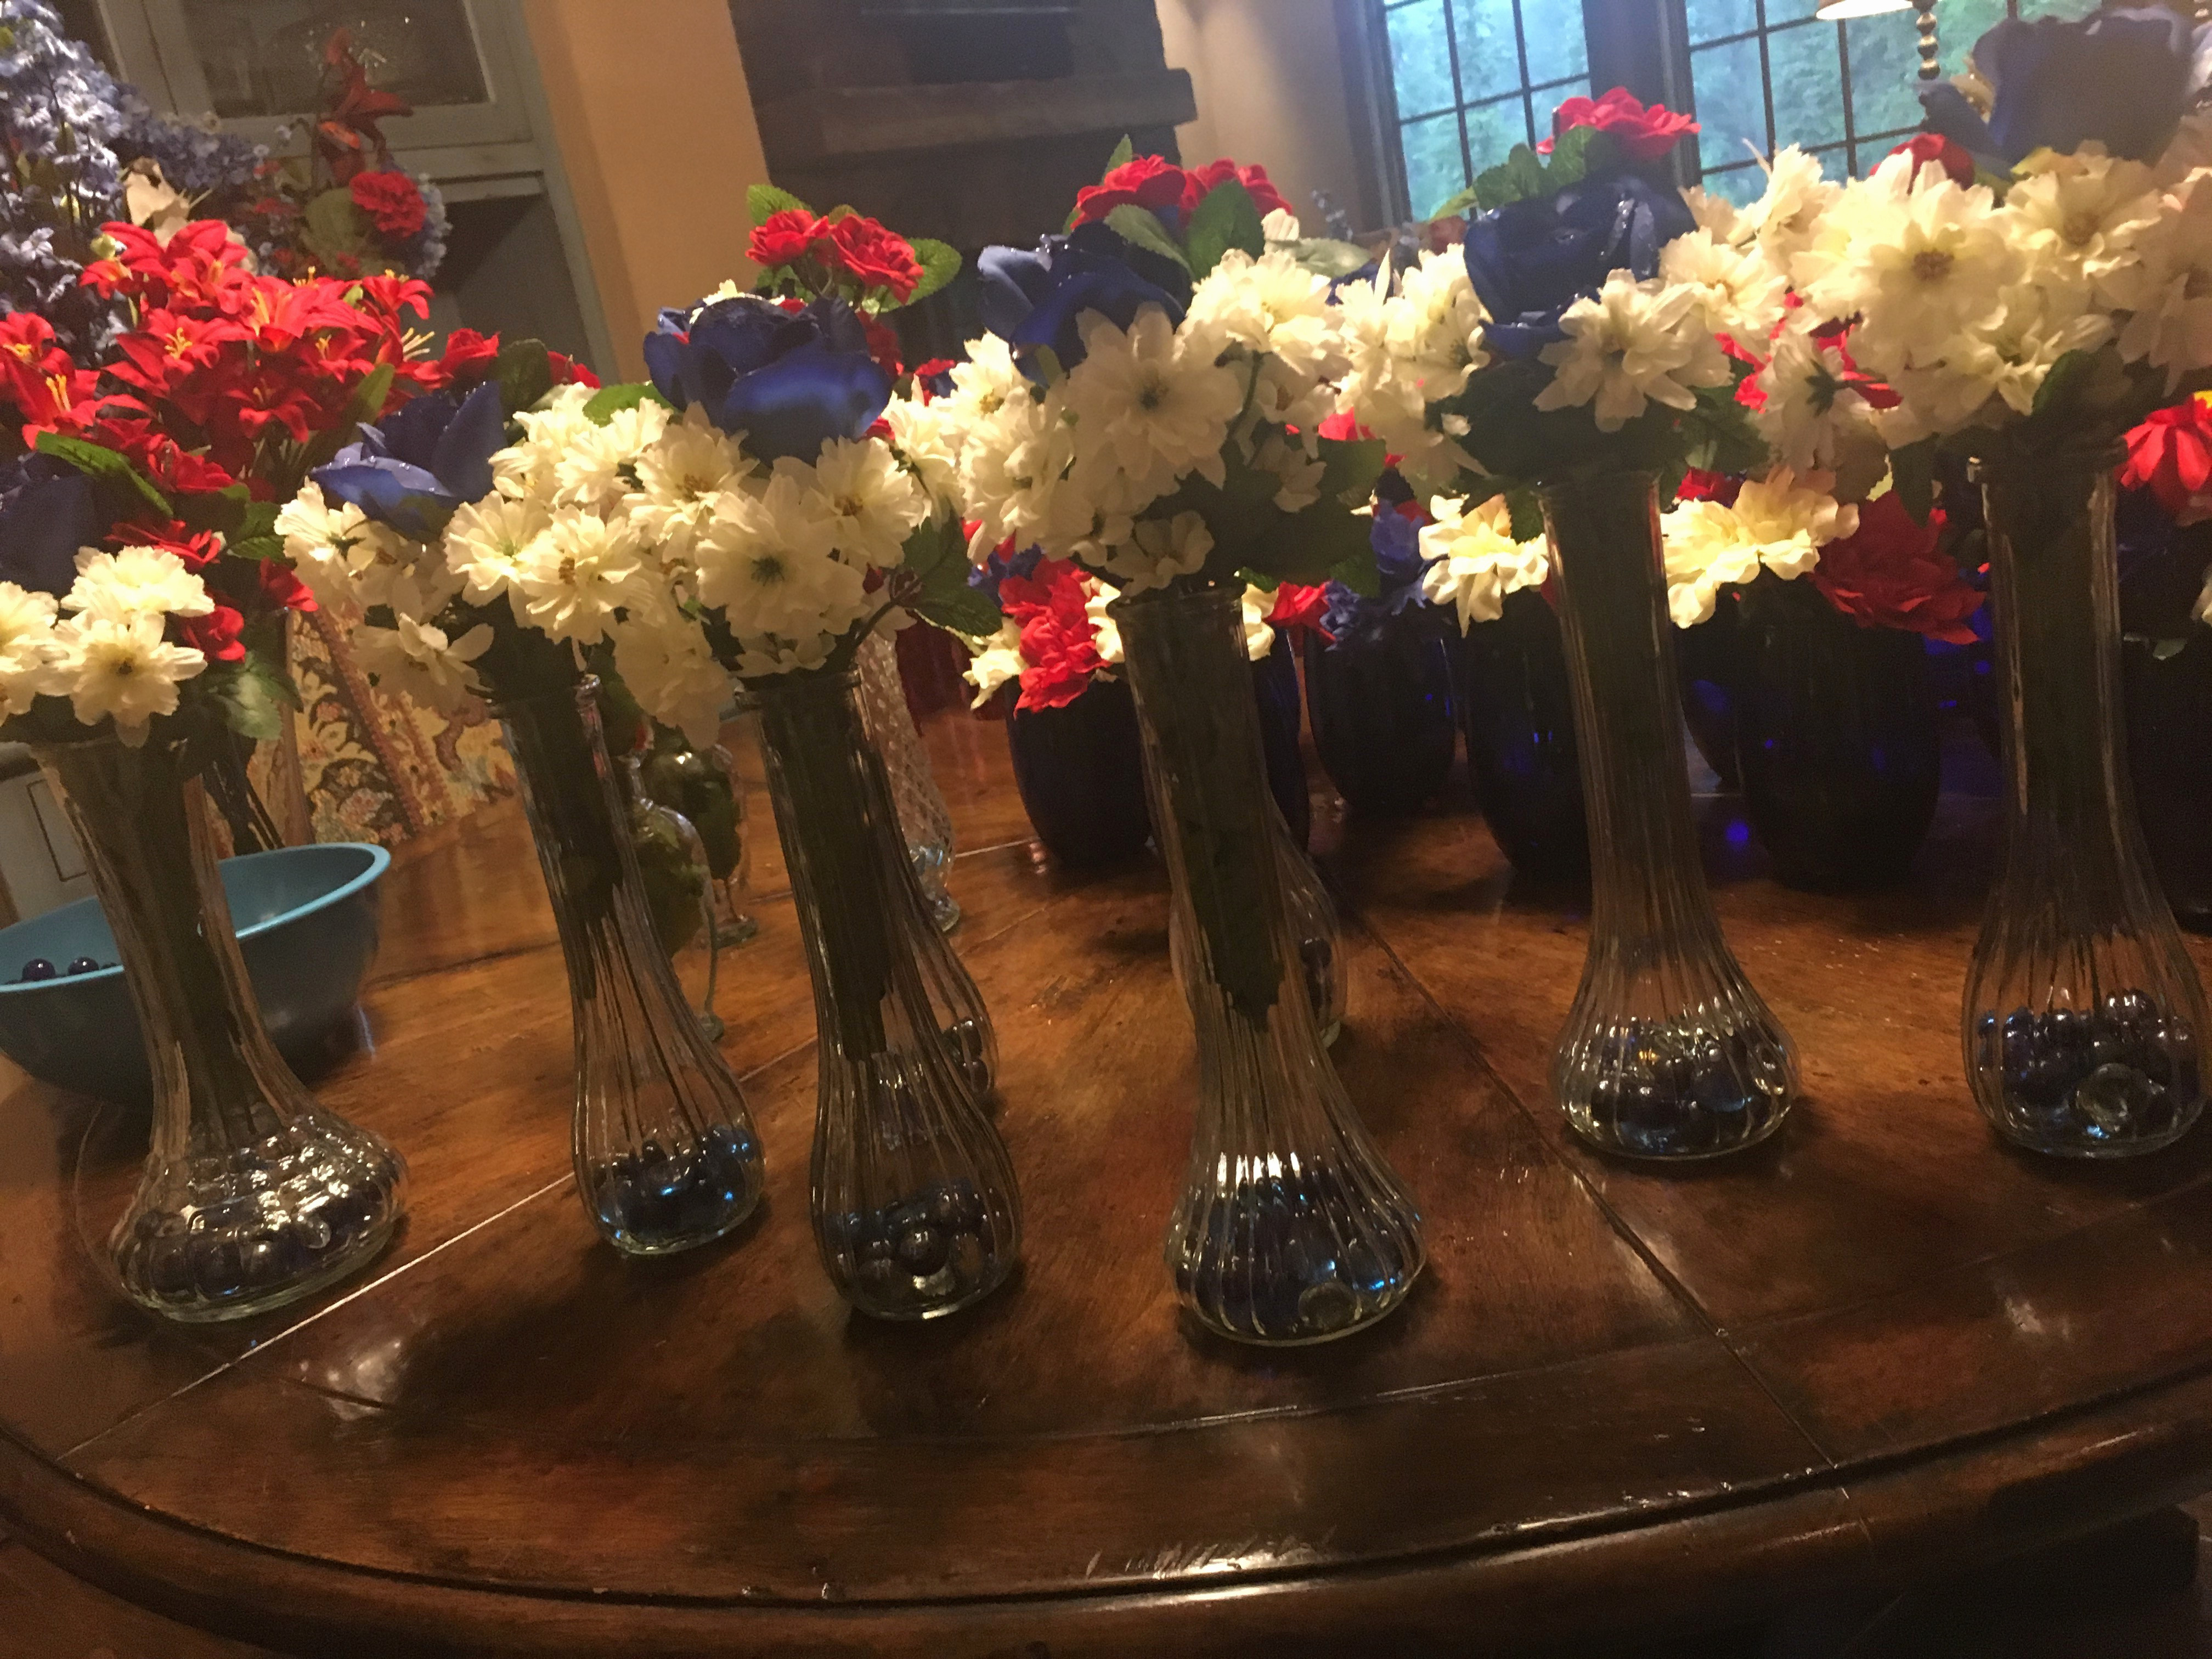 24 Popular Inexpensive Glass Vases Centerpieces 2024 free download inexpensive glass vases centerpieces of wedding party favors wholesale inspirational 50 wholesale glass in wedding party favors wholesale inspirational 50 wholesale glass vases for centerpie